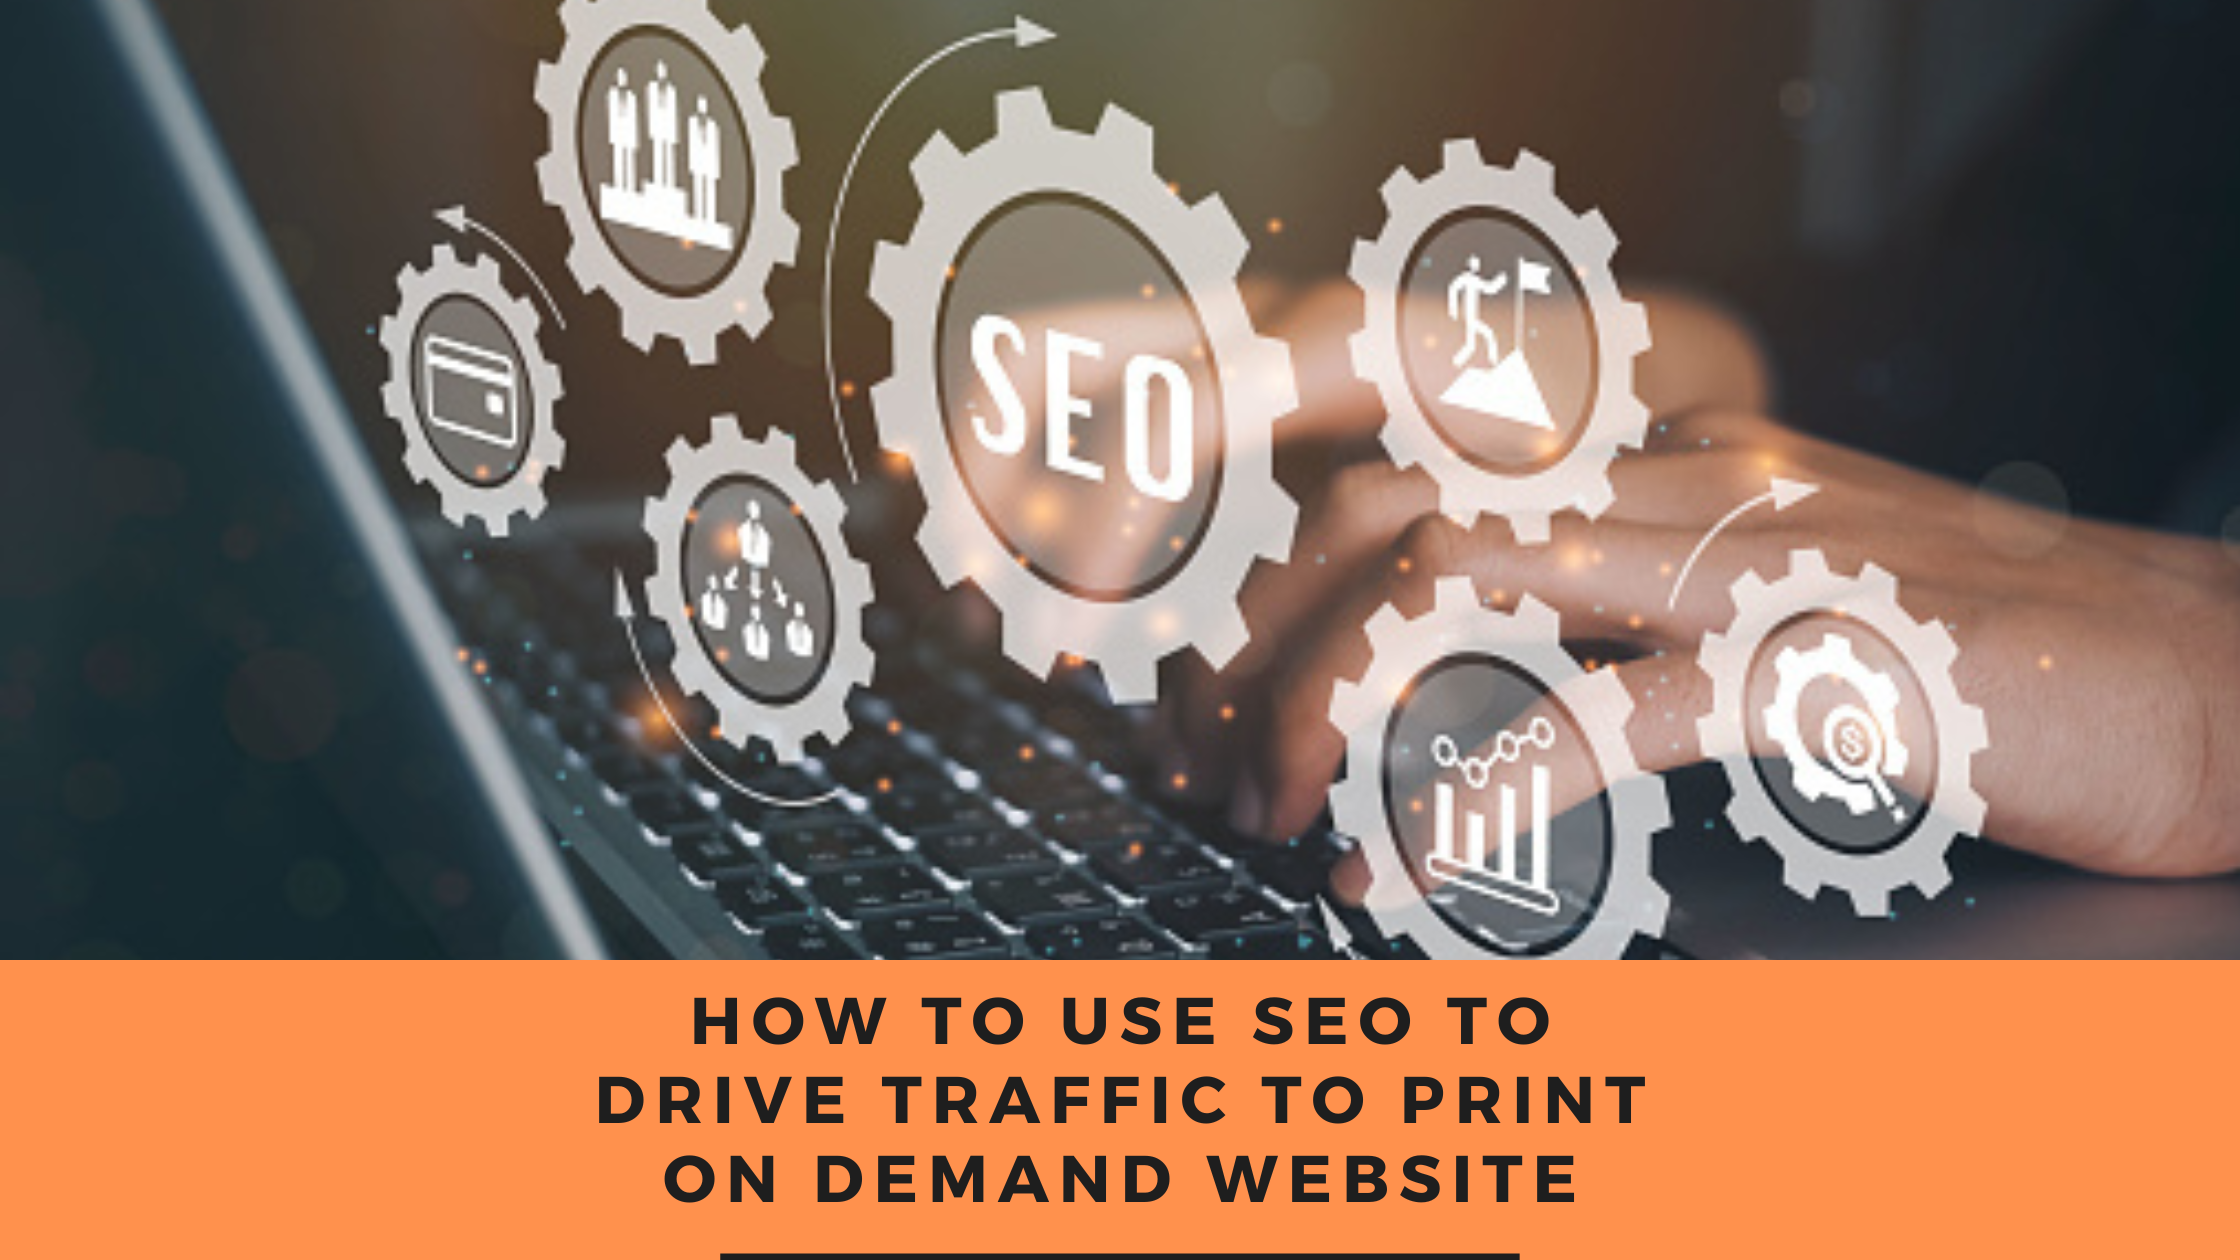 How To Use Seo To Drive Traffic To Your Print On Demand Website